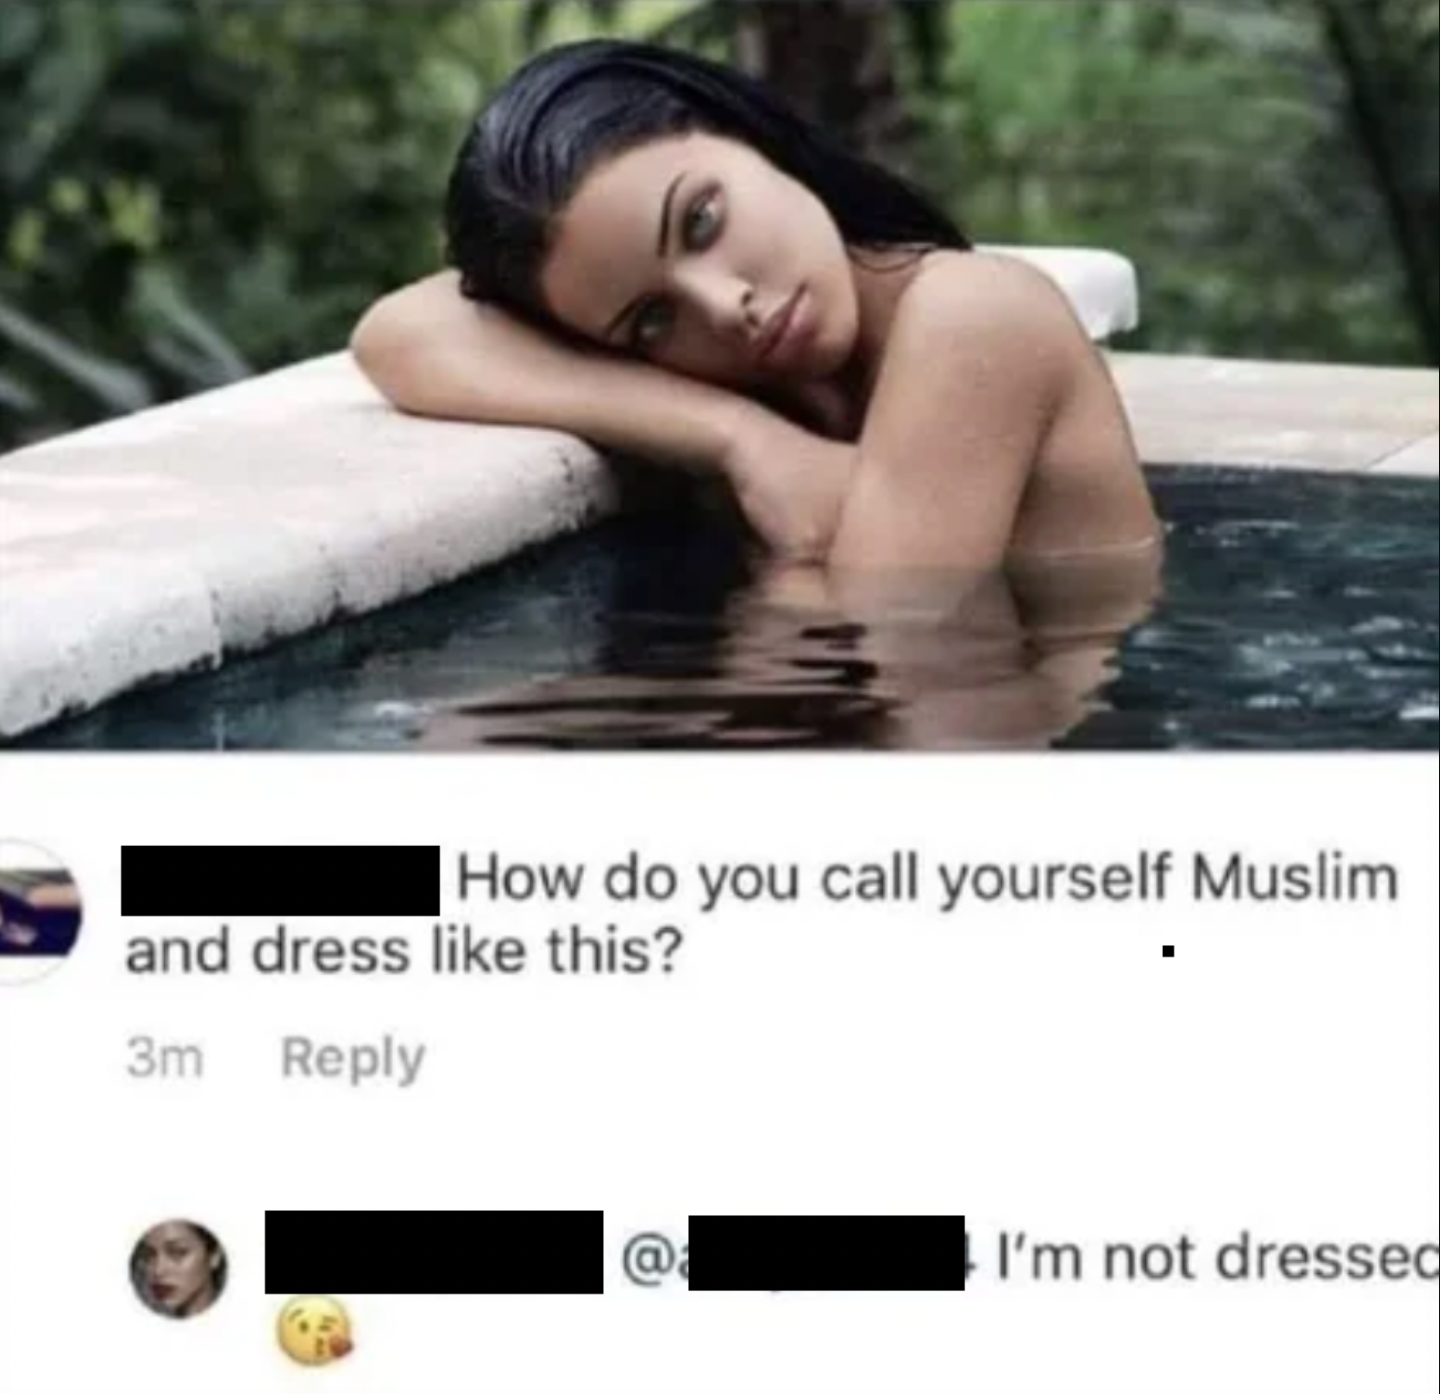 Funny Facepalms - How do you call yourself Muslim and dress this?  I'm not dressed